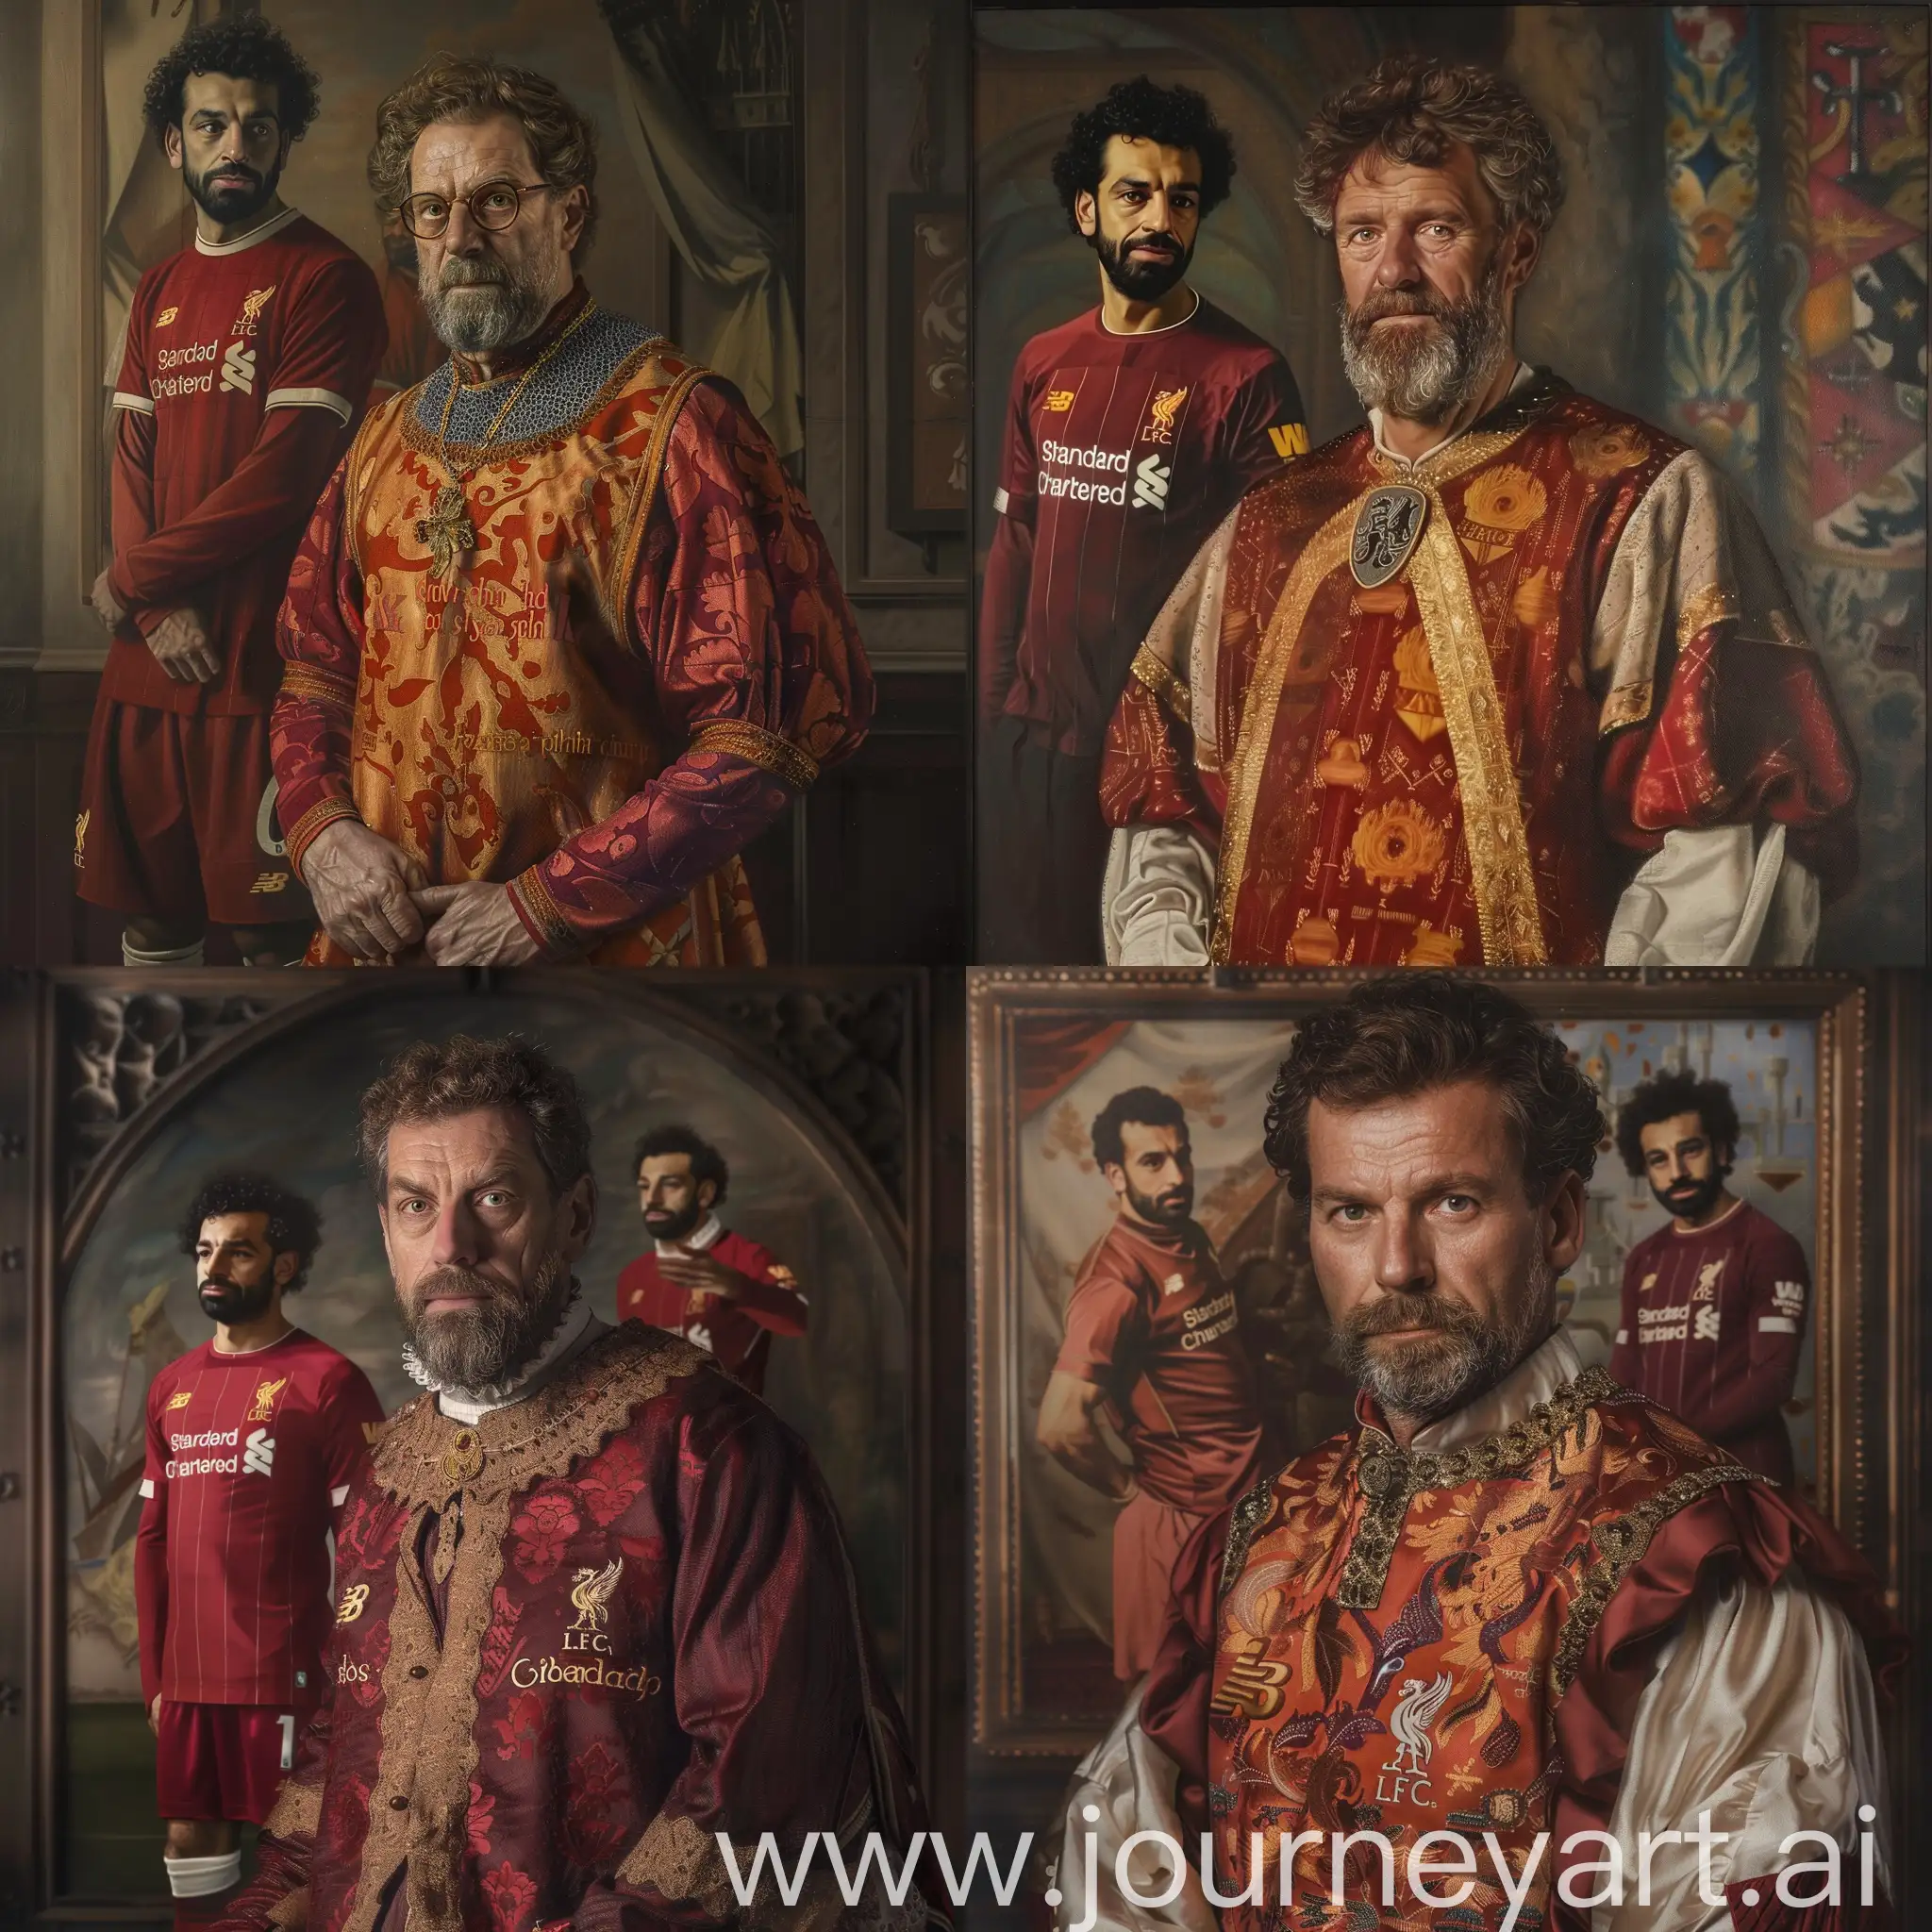 Royal-Portrait-of-Jurgen-Klopp-as-an-Earl-with-Mohamed-Salah-Painting-in-Background